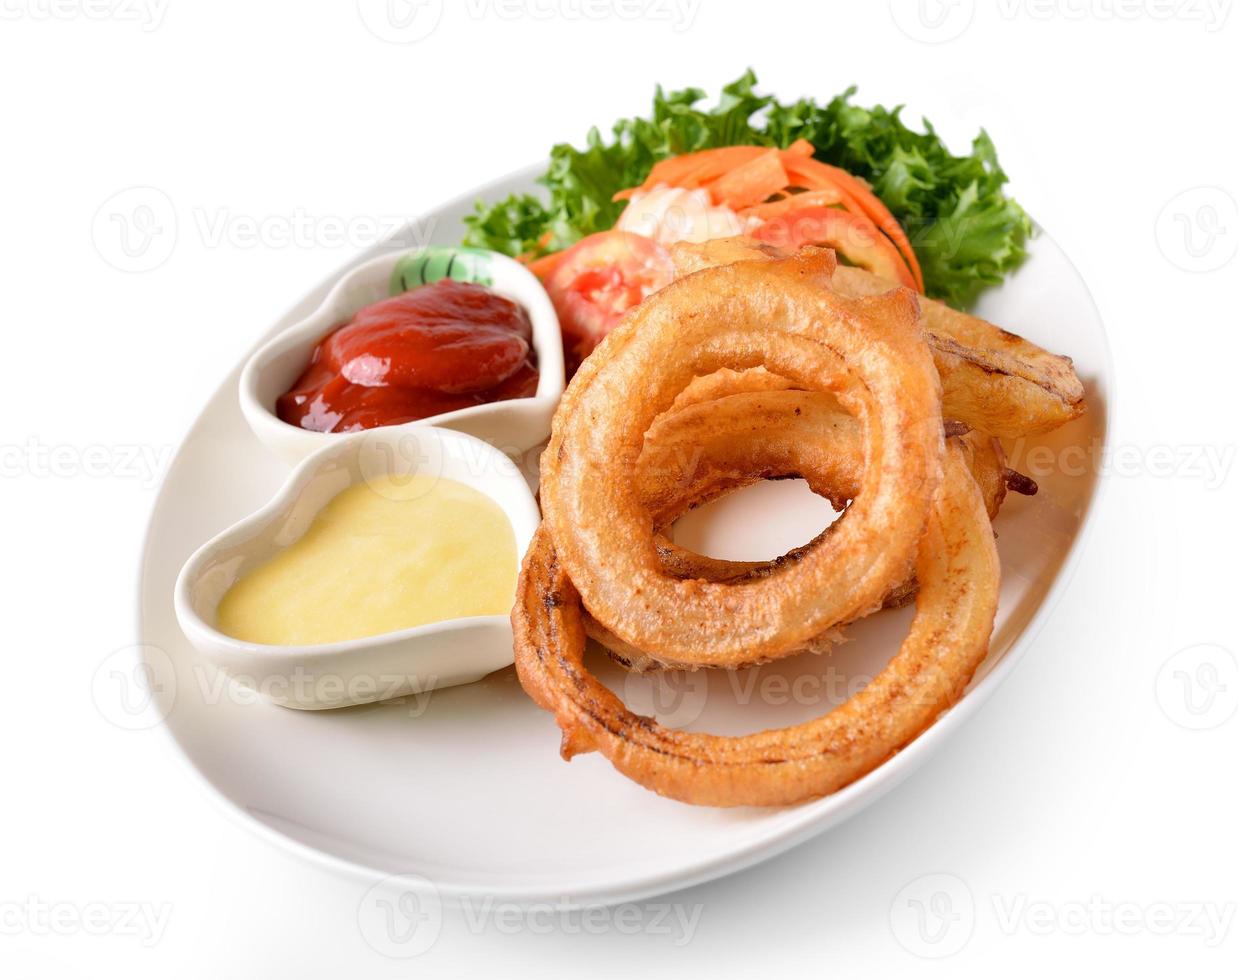 onion rings on a plate on white background photo